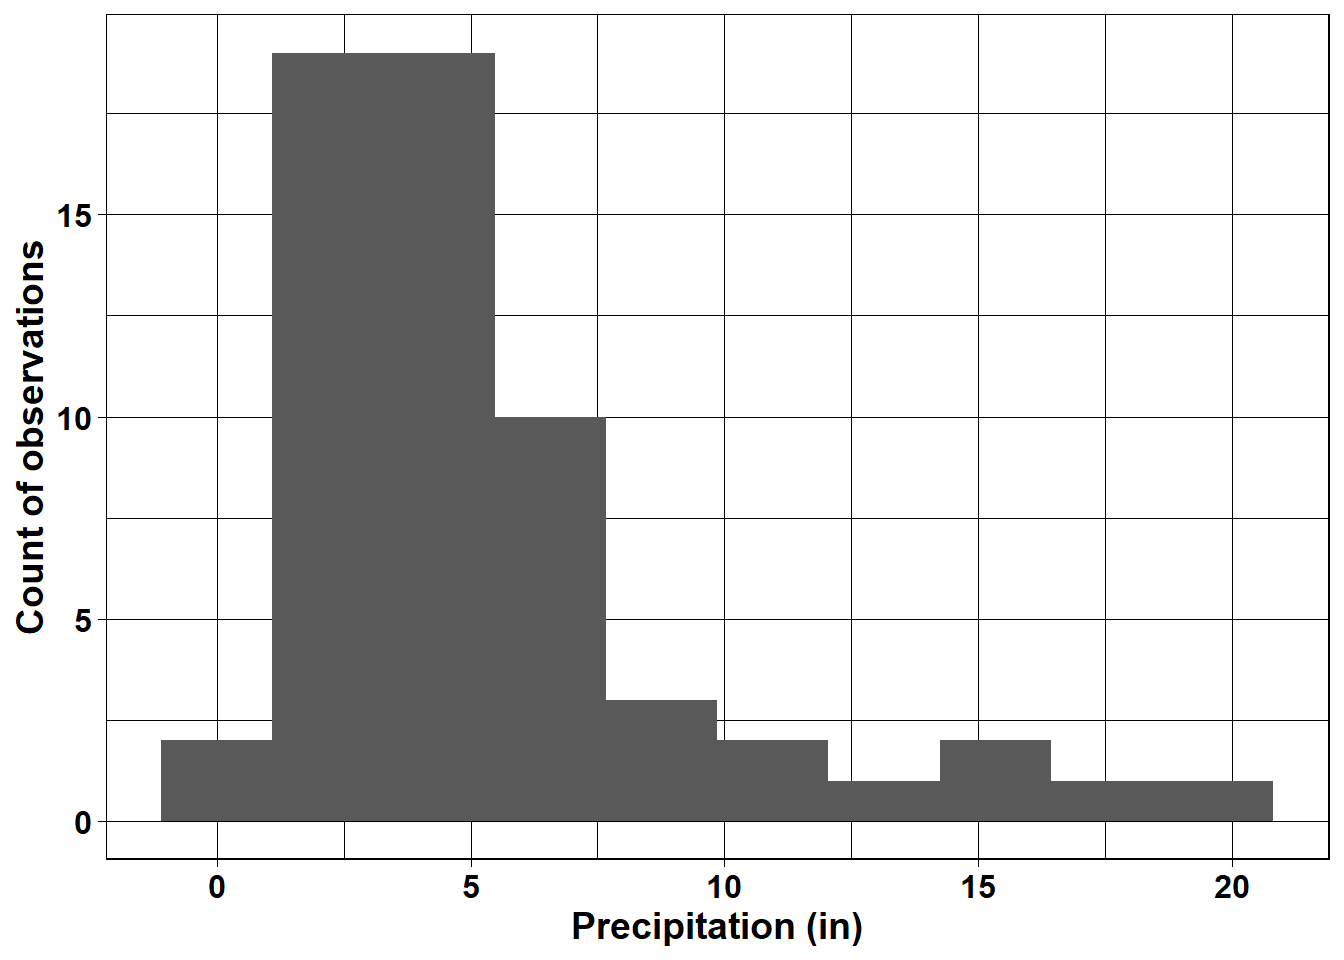 Histogram of monthly rainfall at Mt. Herman.